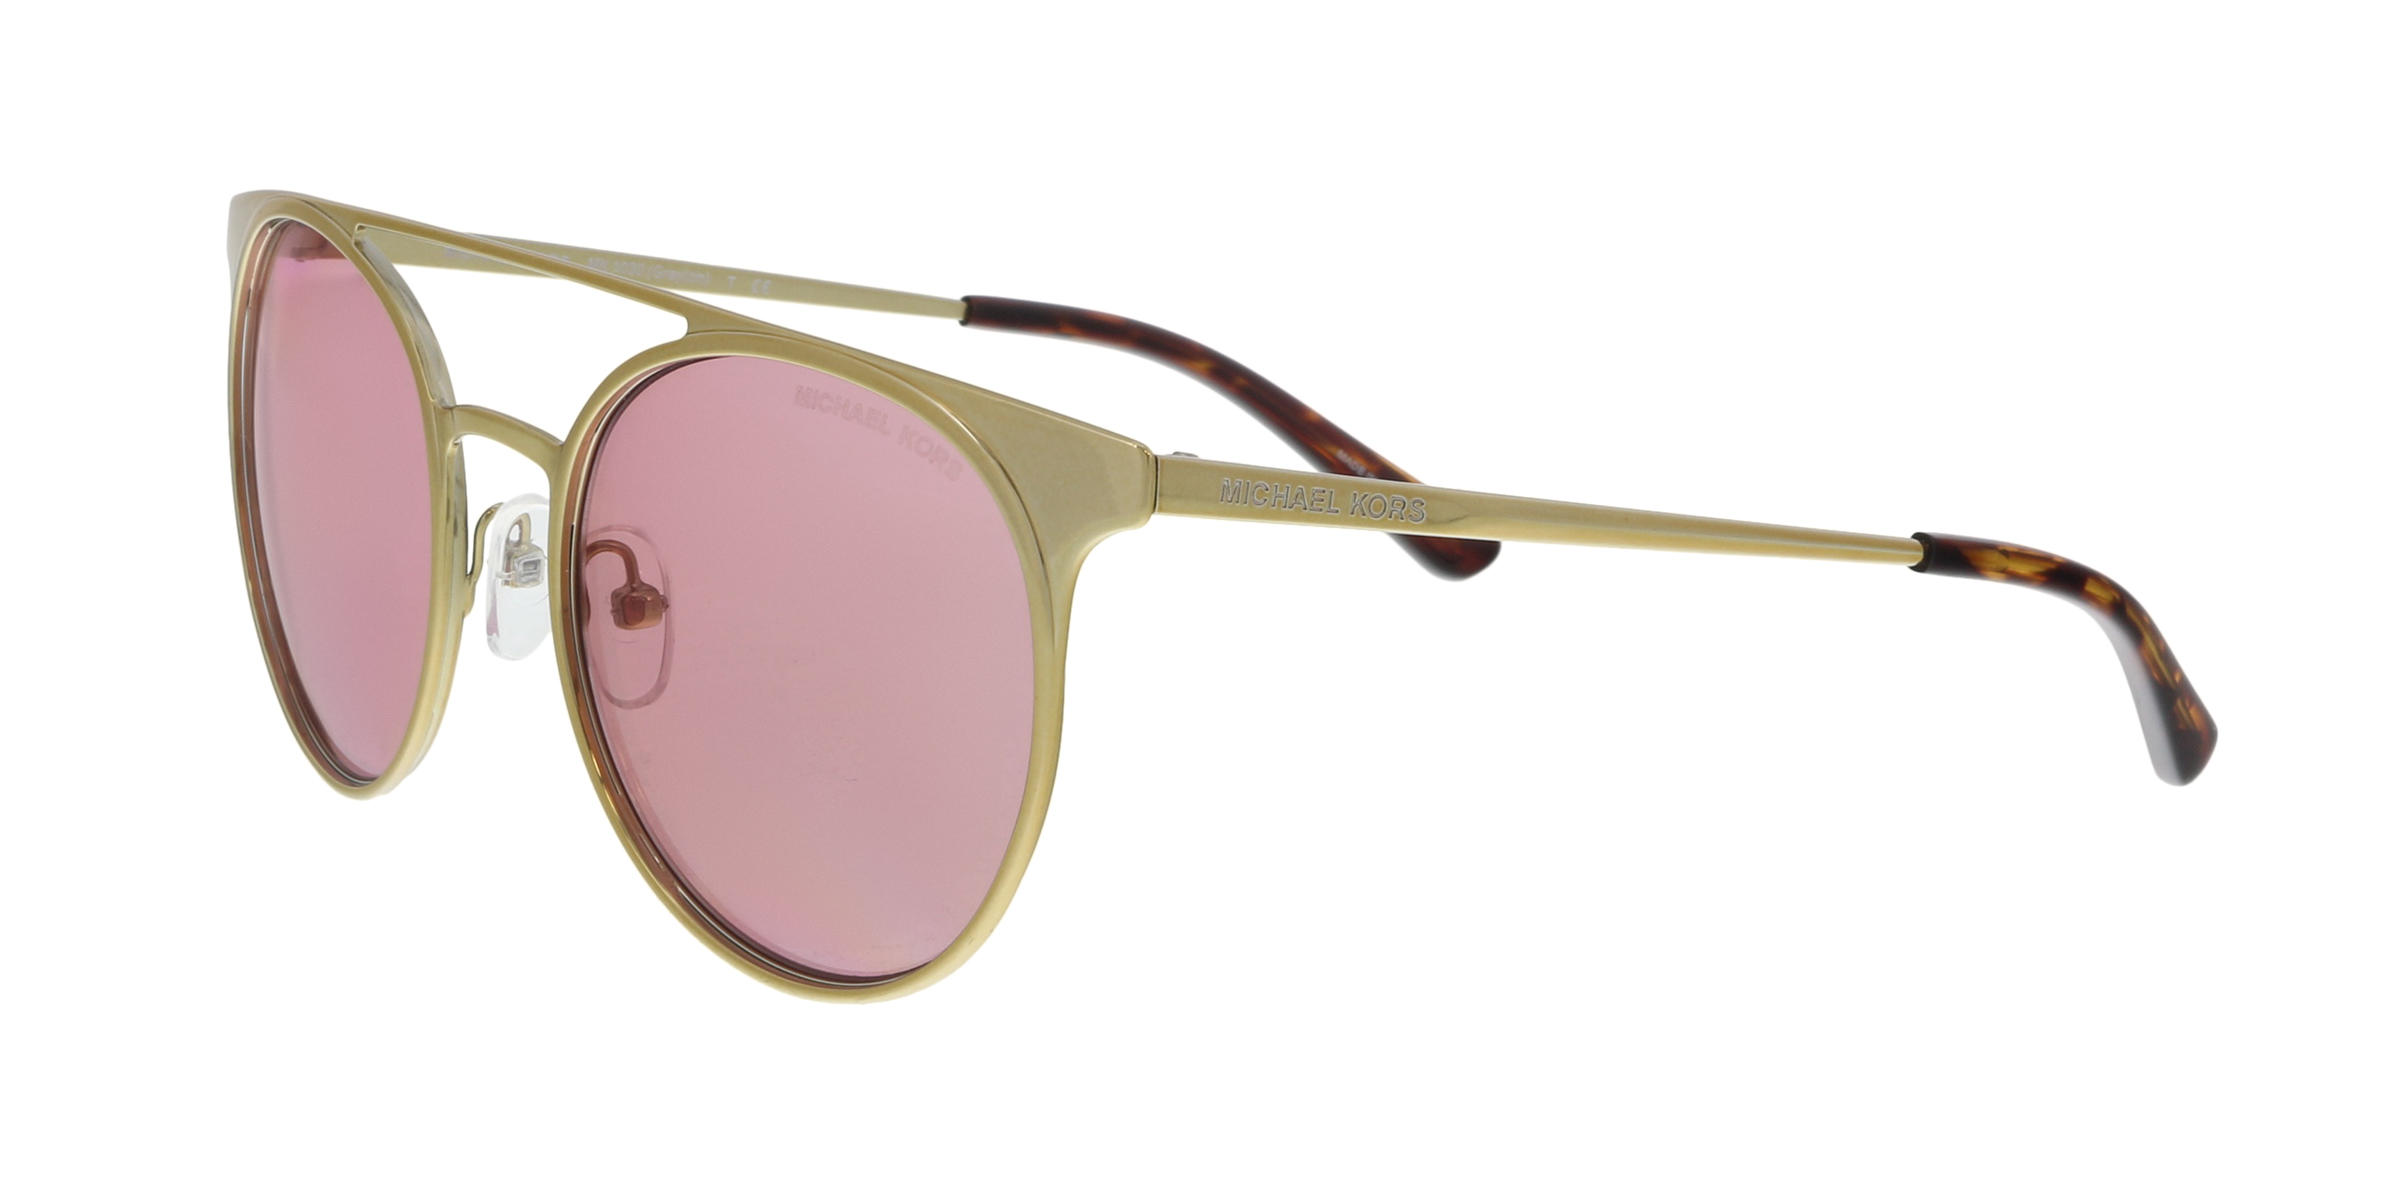 Michael Kors MK1030 116884 Shiny Pale Gold Round Sunglasses for Womens - image 1 of 5